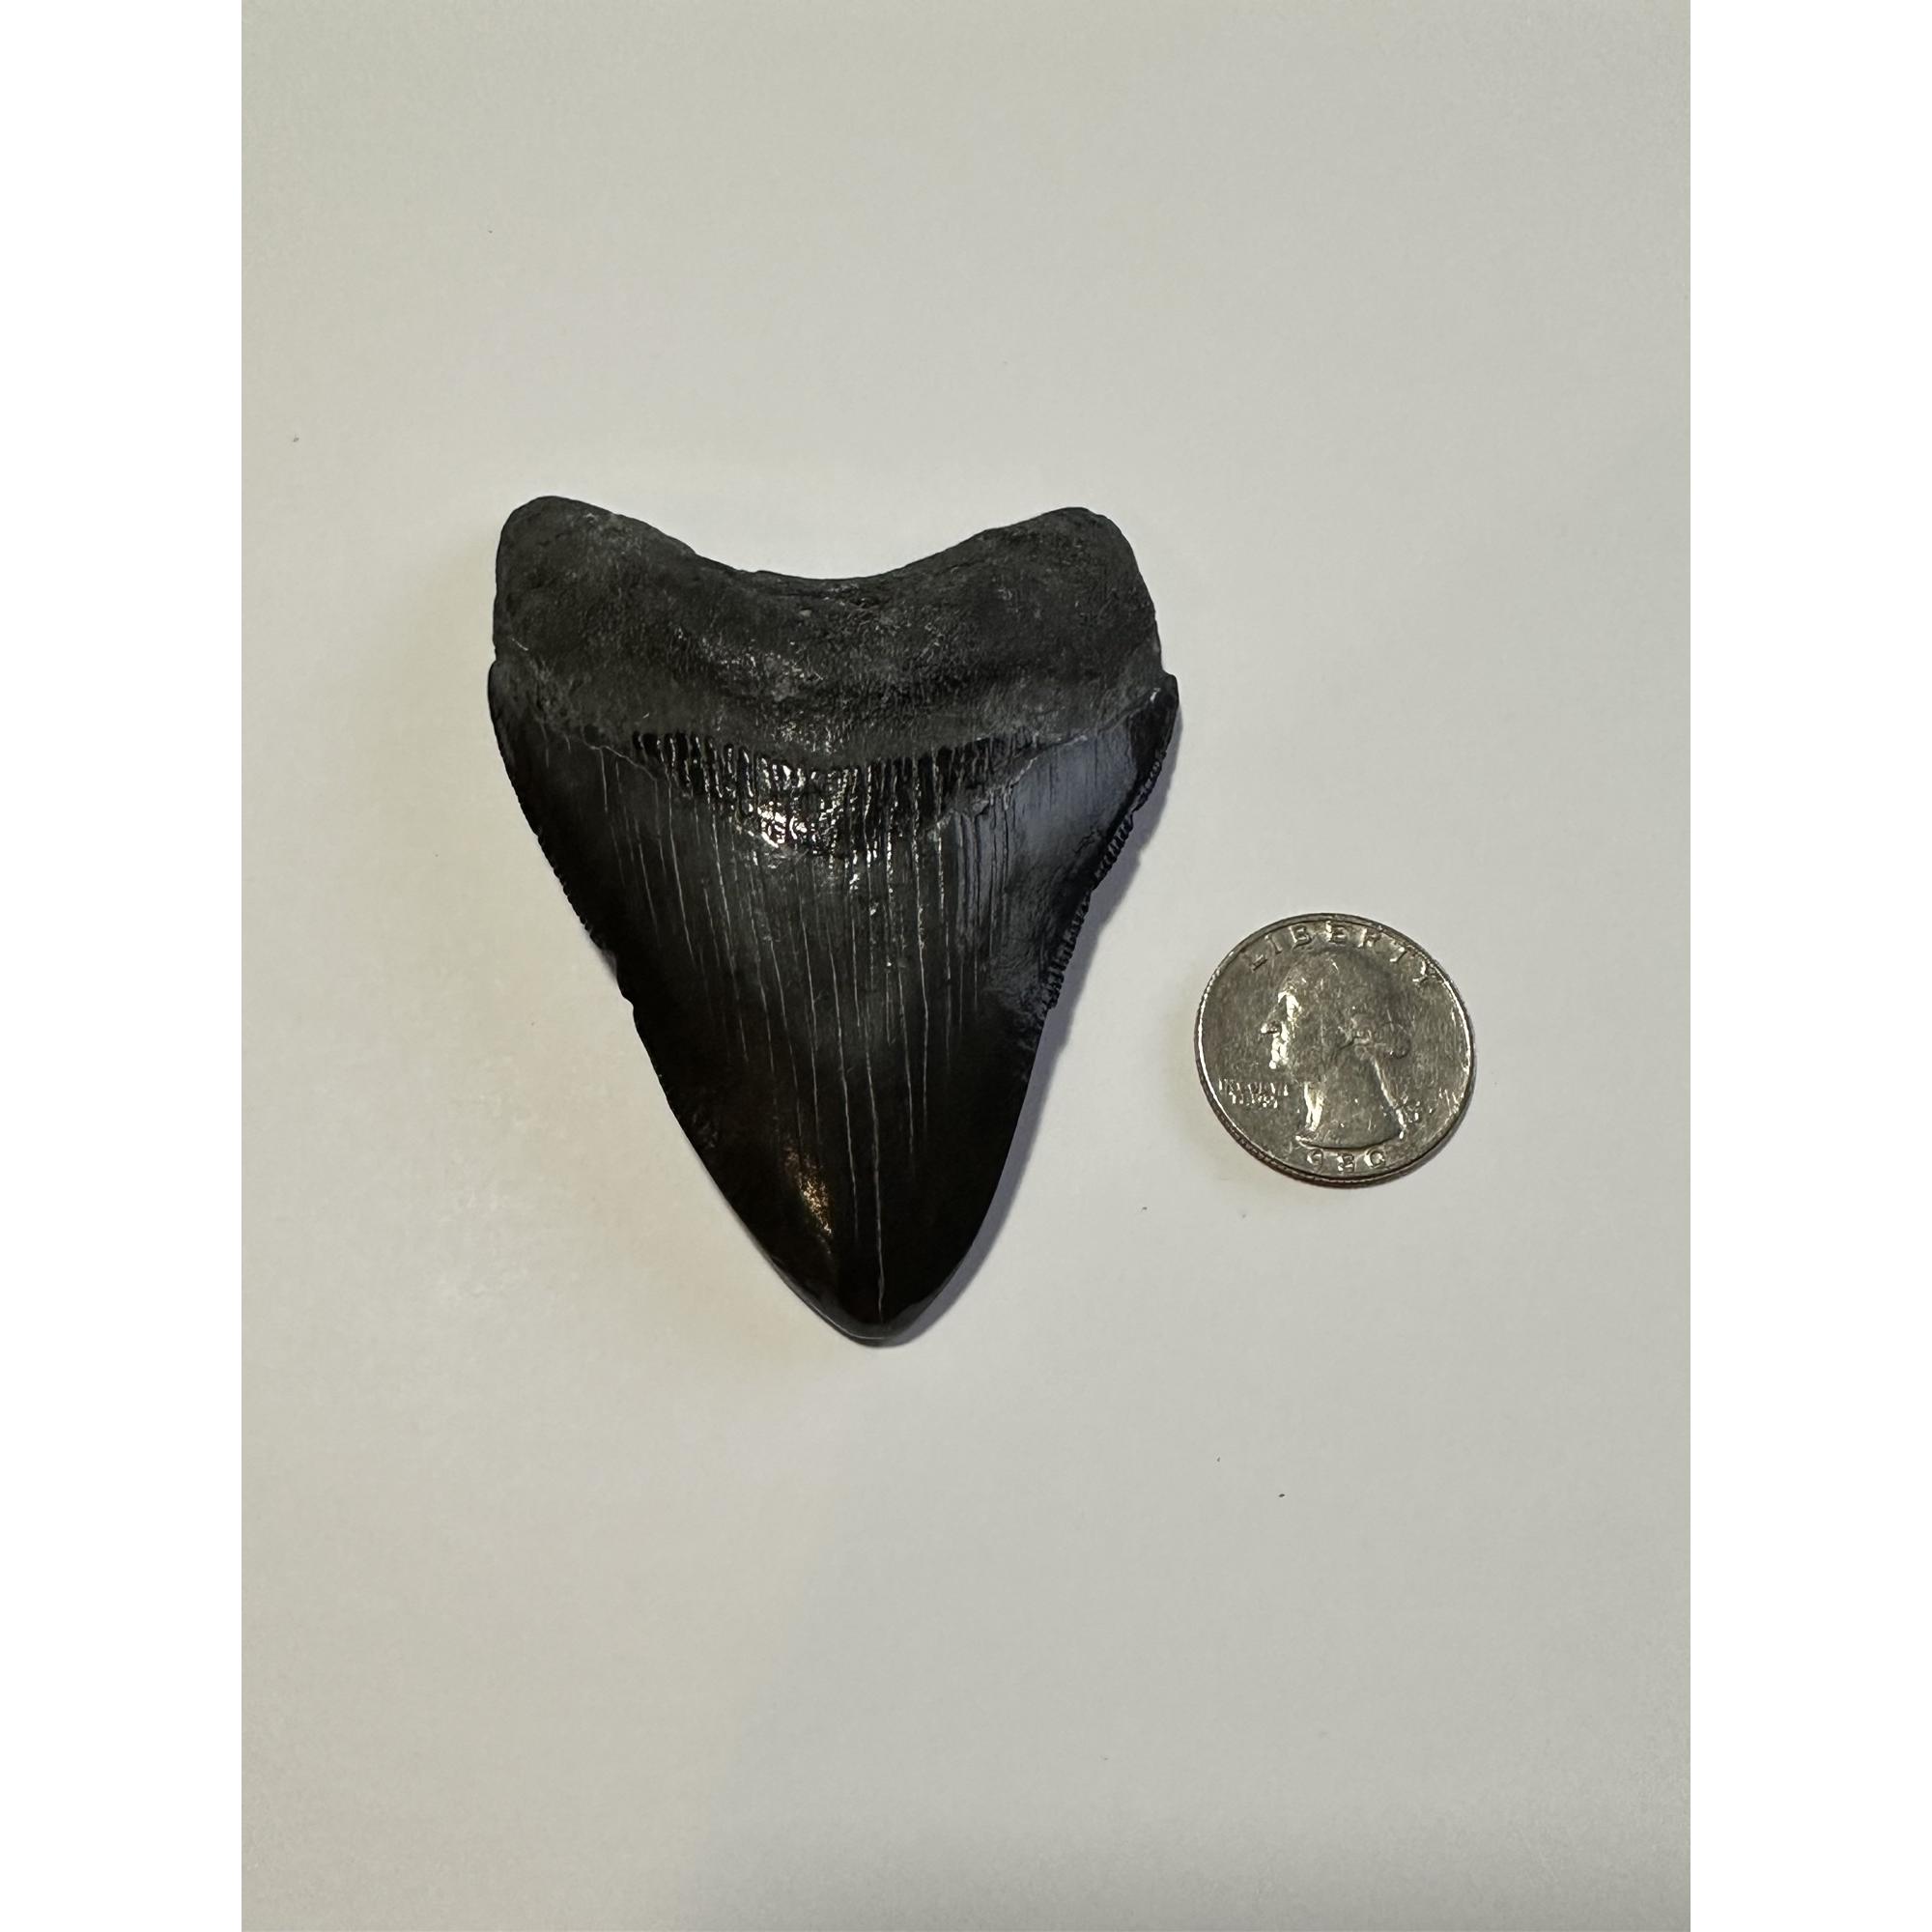 This incredible 3.30 inch megalodon tooth has a black enamel with wonderful serrations